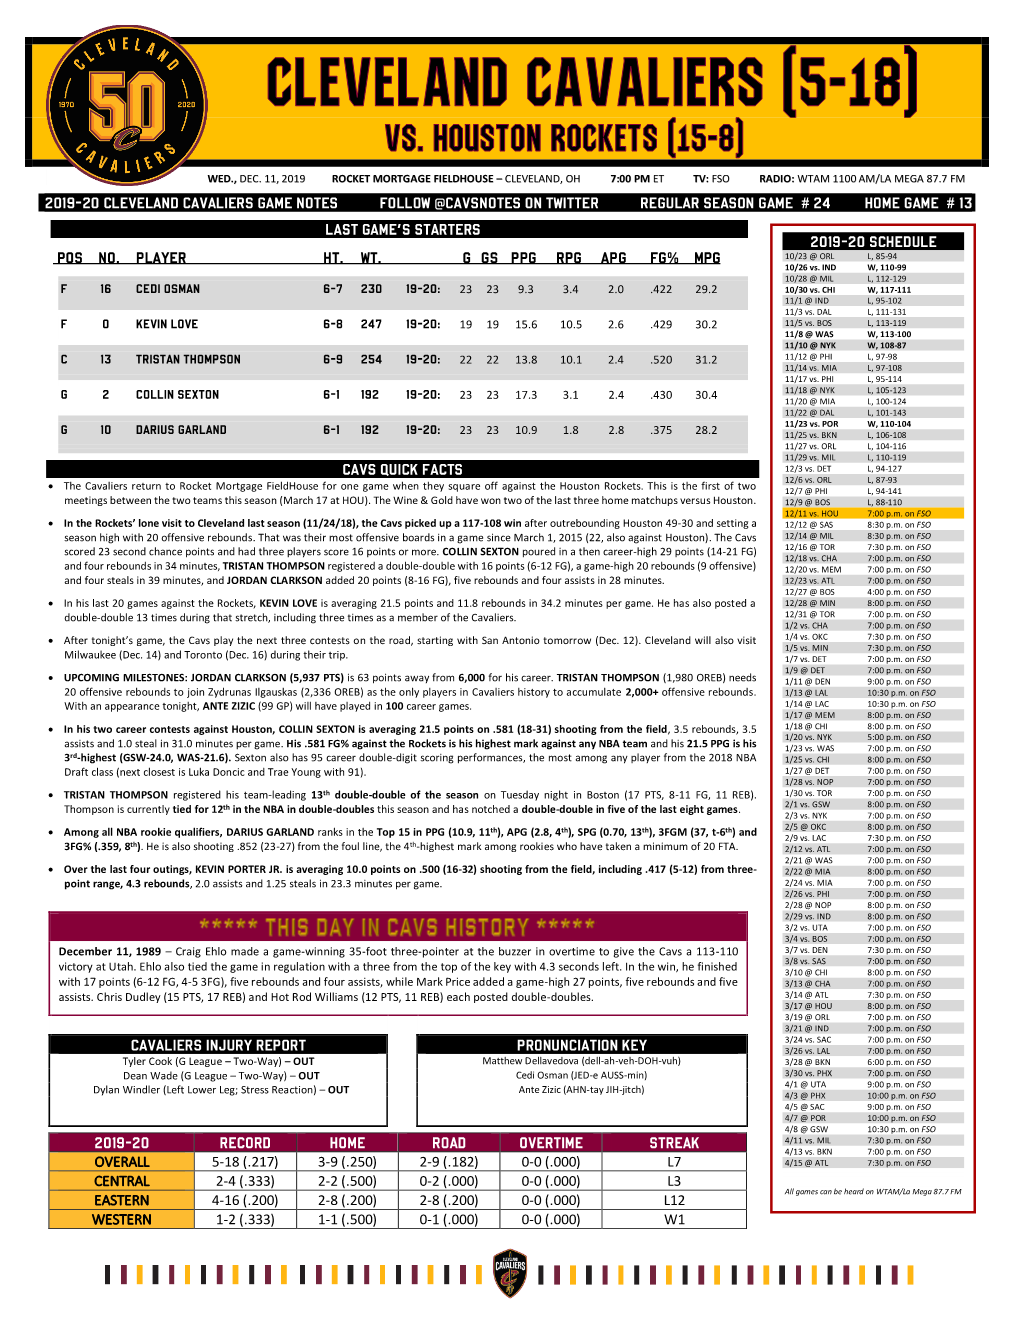 2019-20 Cleveland Cavaliers Game Notes Follow @Cavsnotes on Twitter Regular Season Game # 24 Home Game # 13